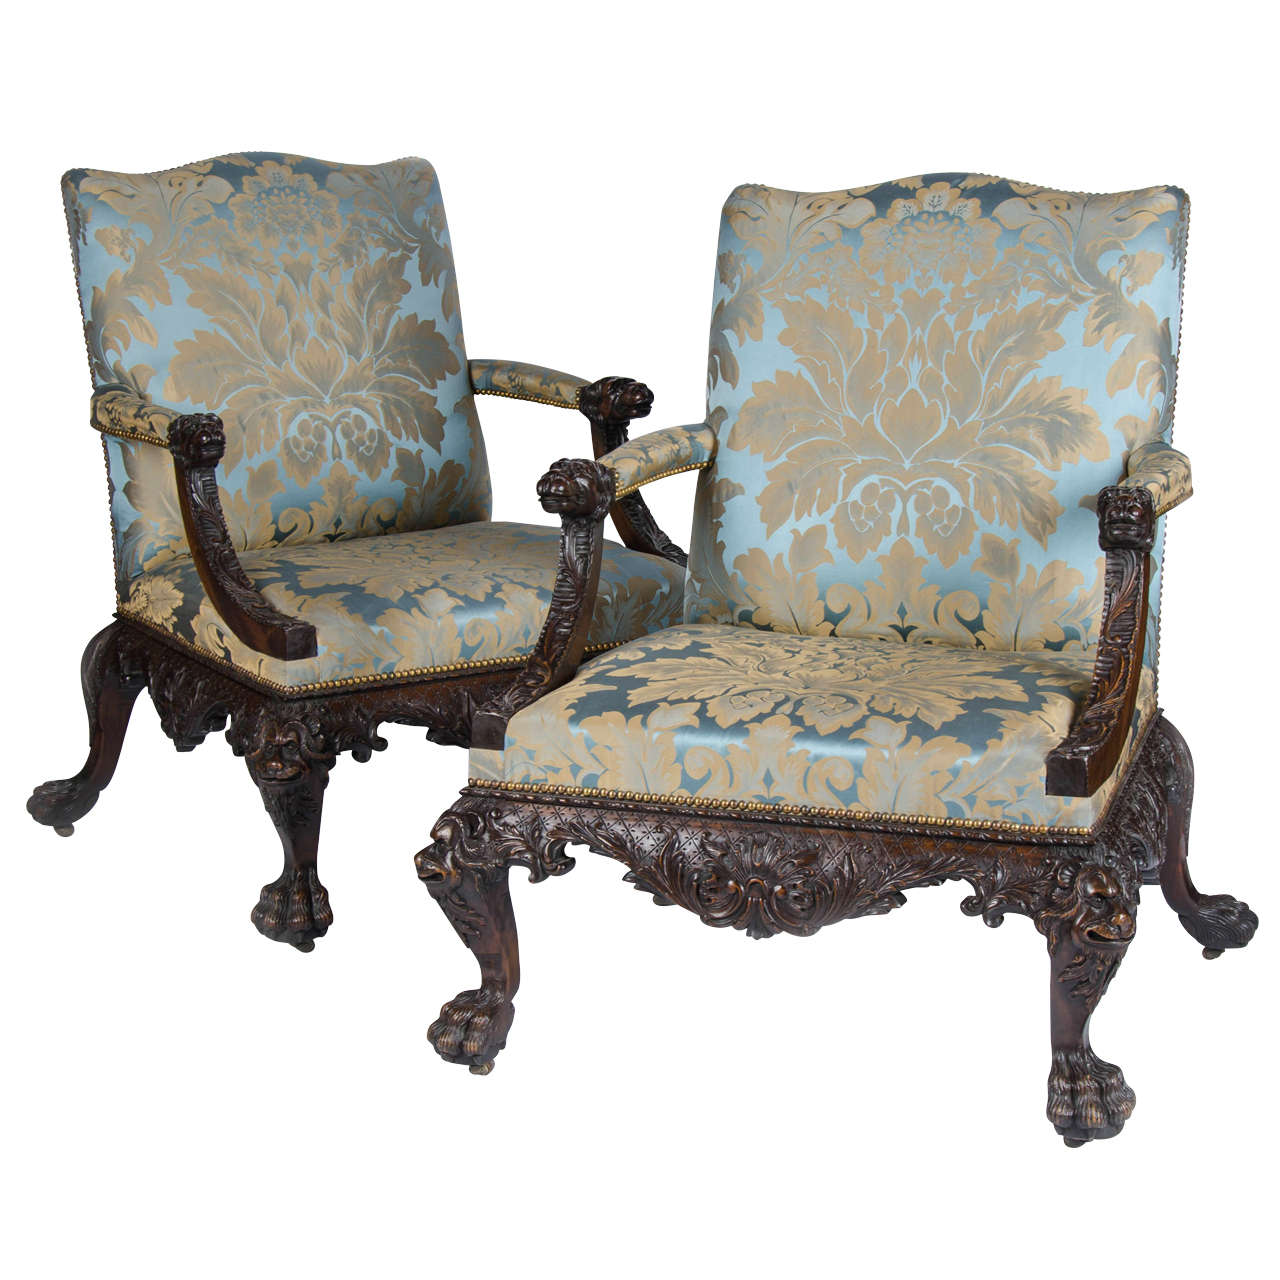 Superb Pair of Carved Mahogany Open-Arm Chairs in the Georgian Style